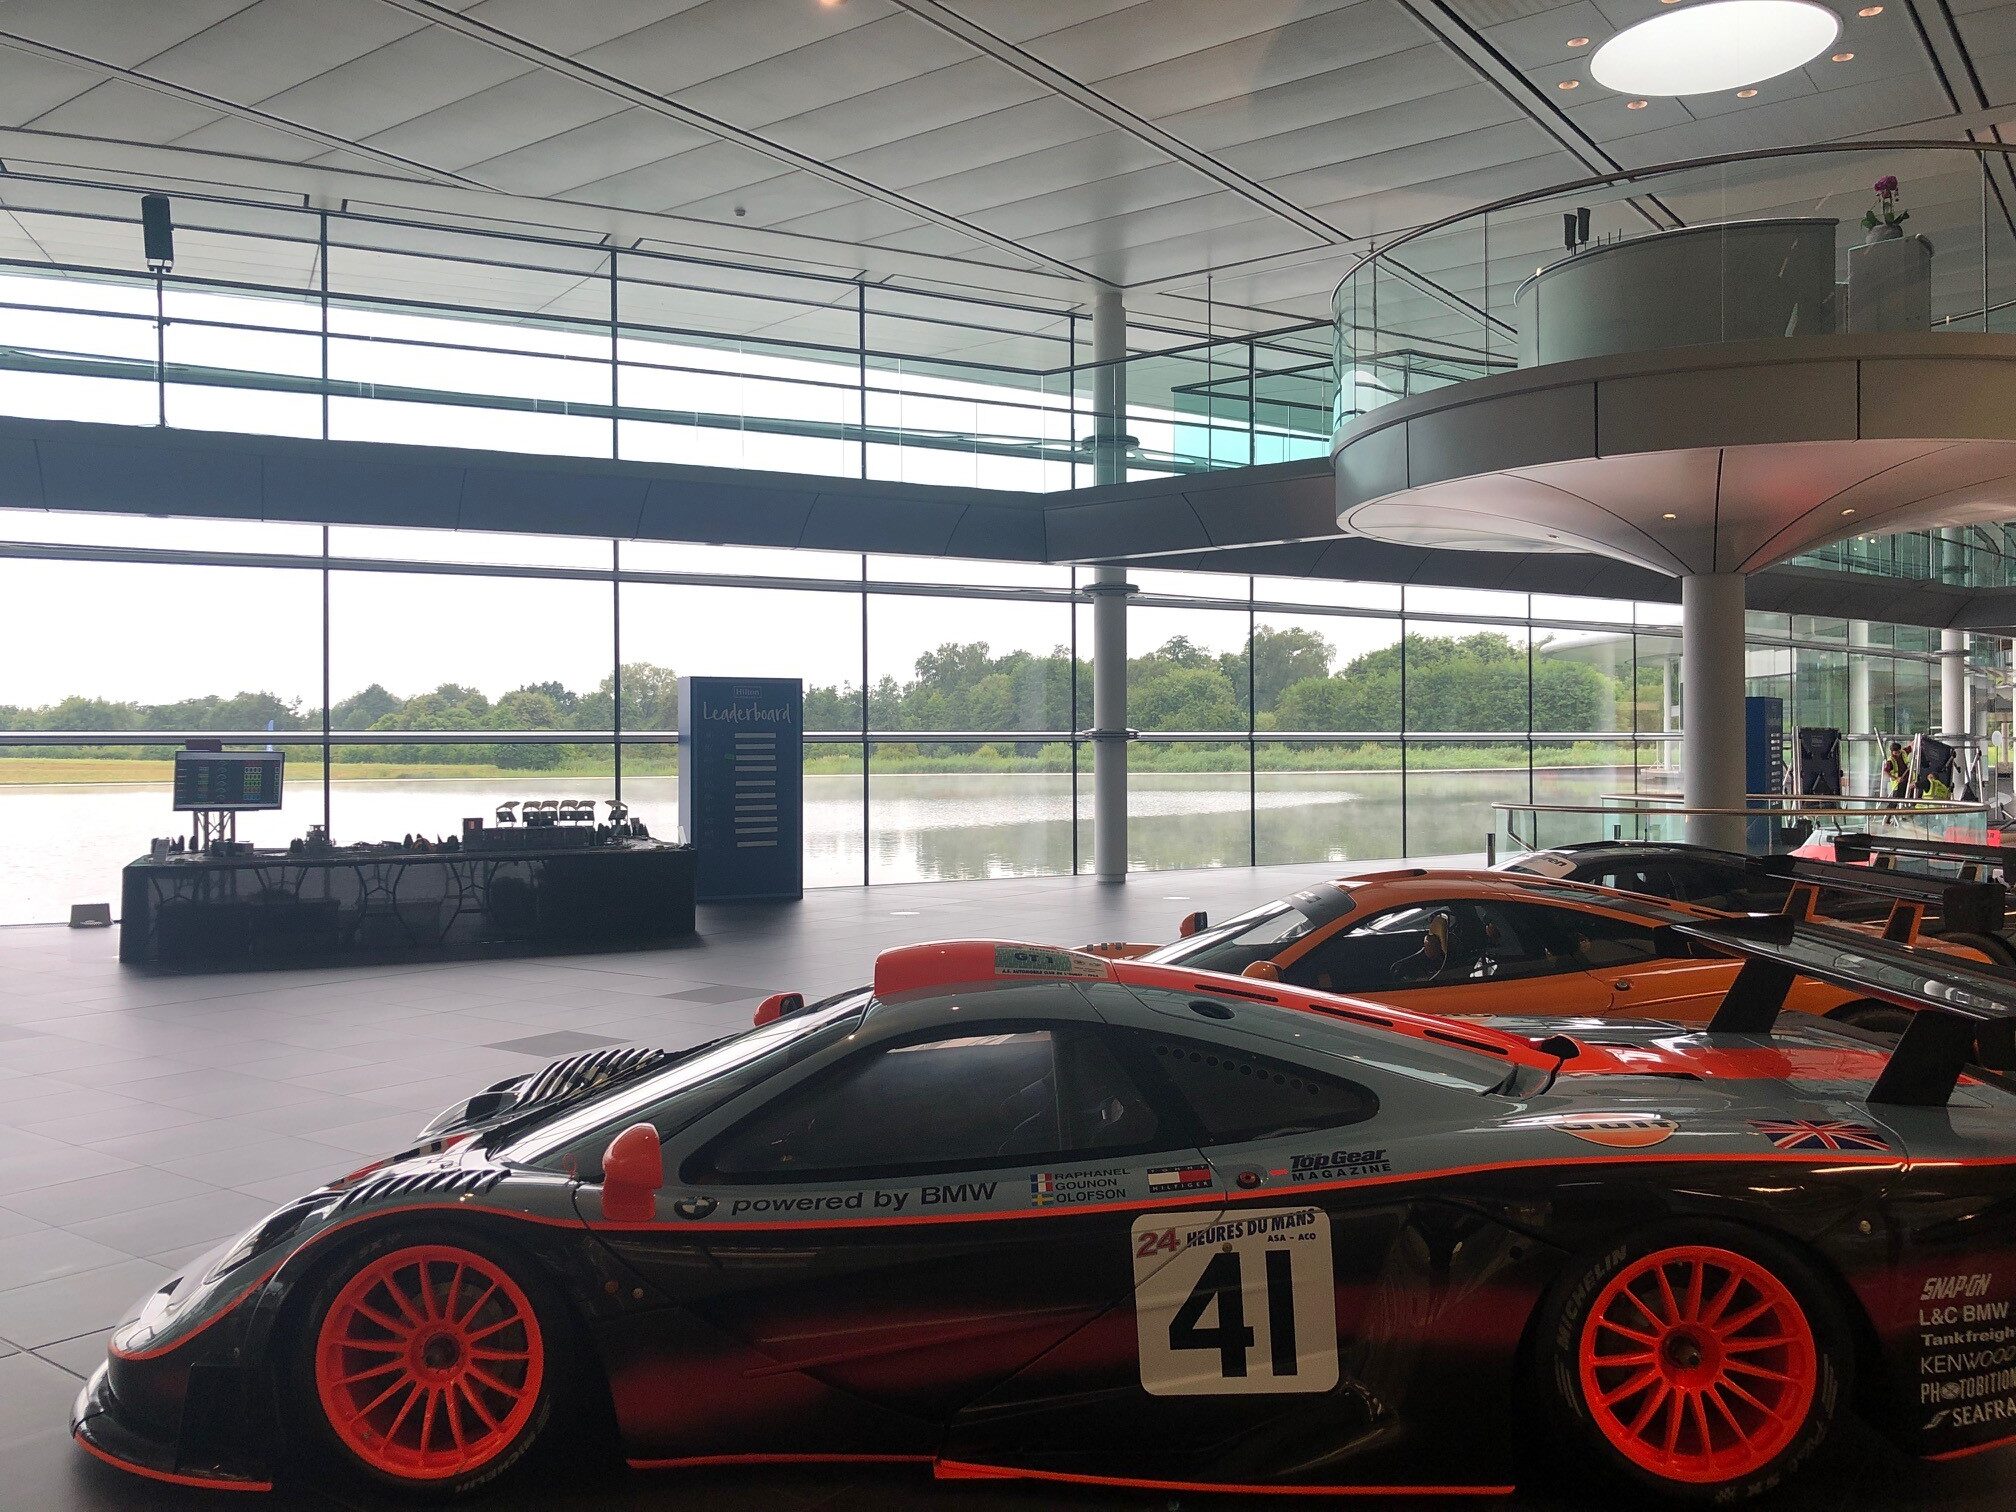 McLaren F1 with Hilton Honors